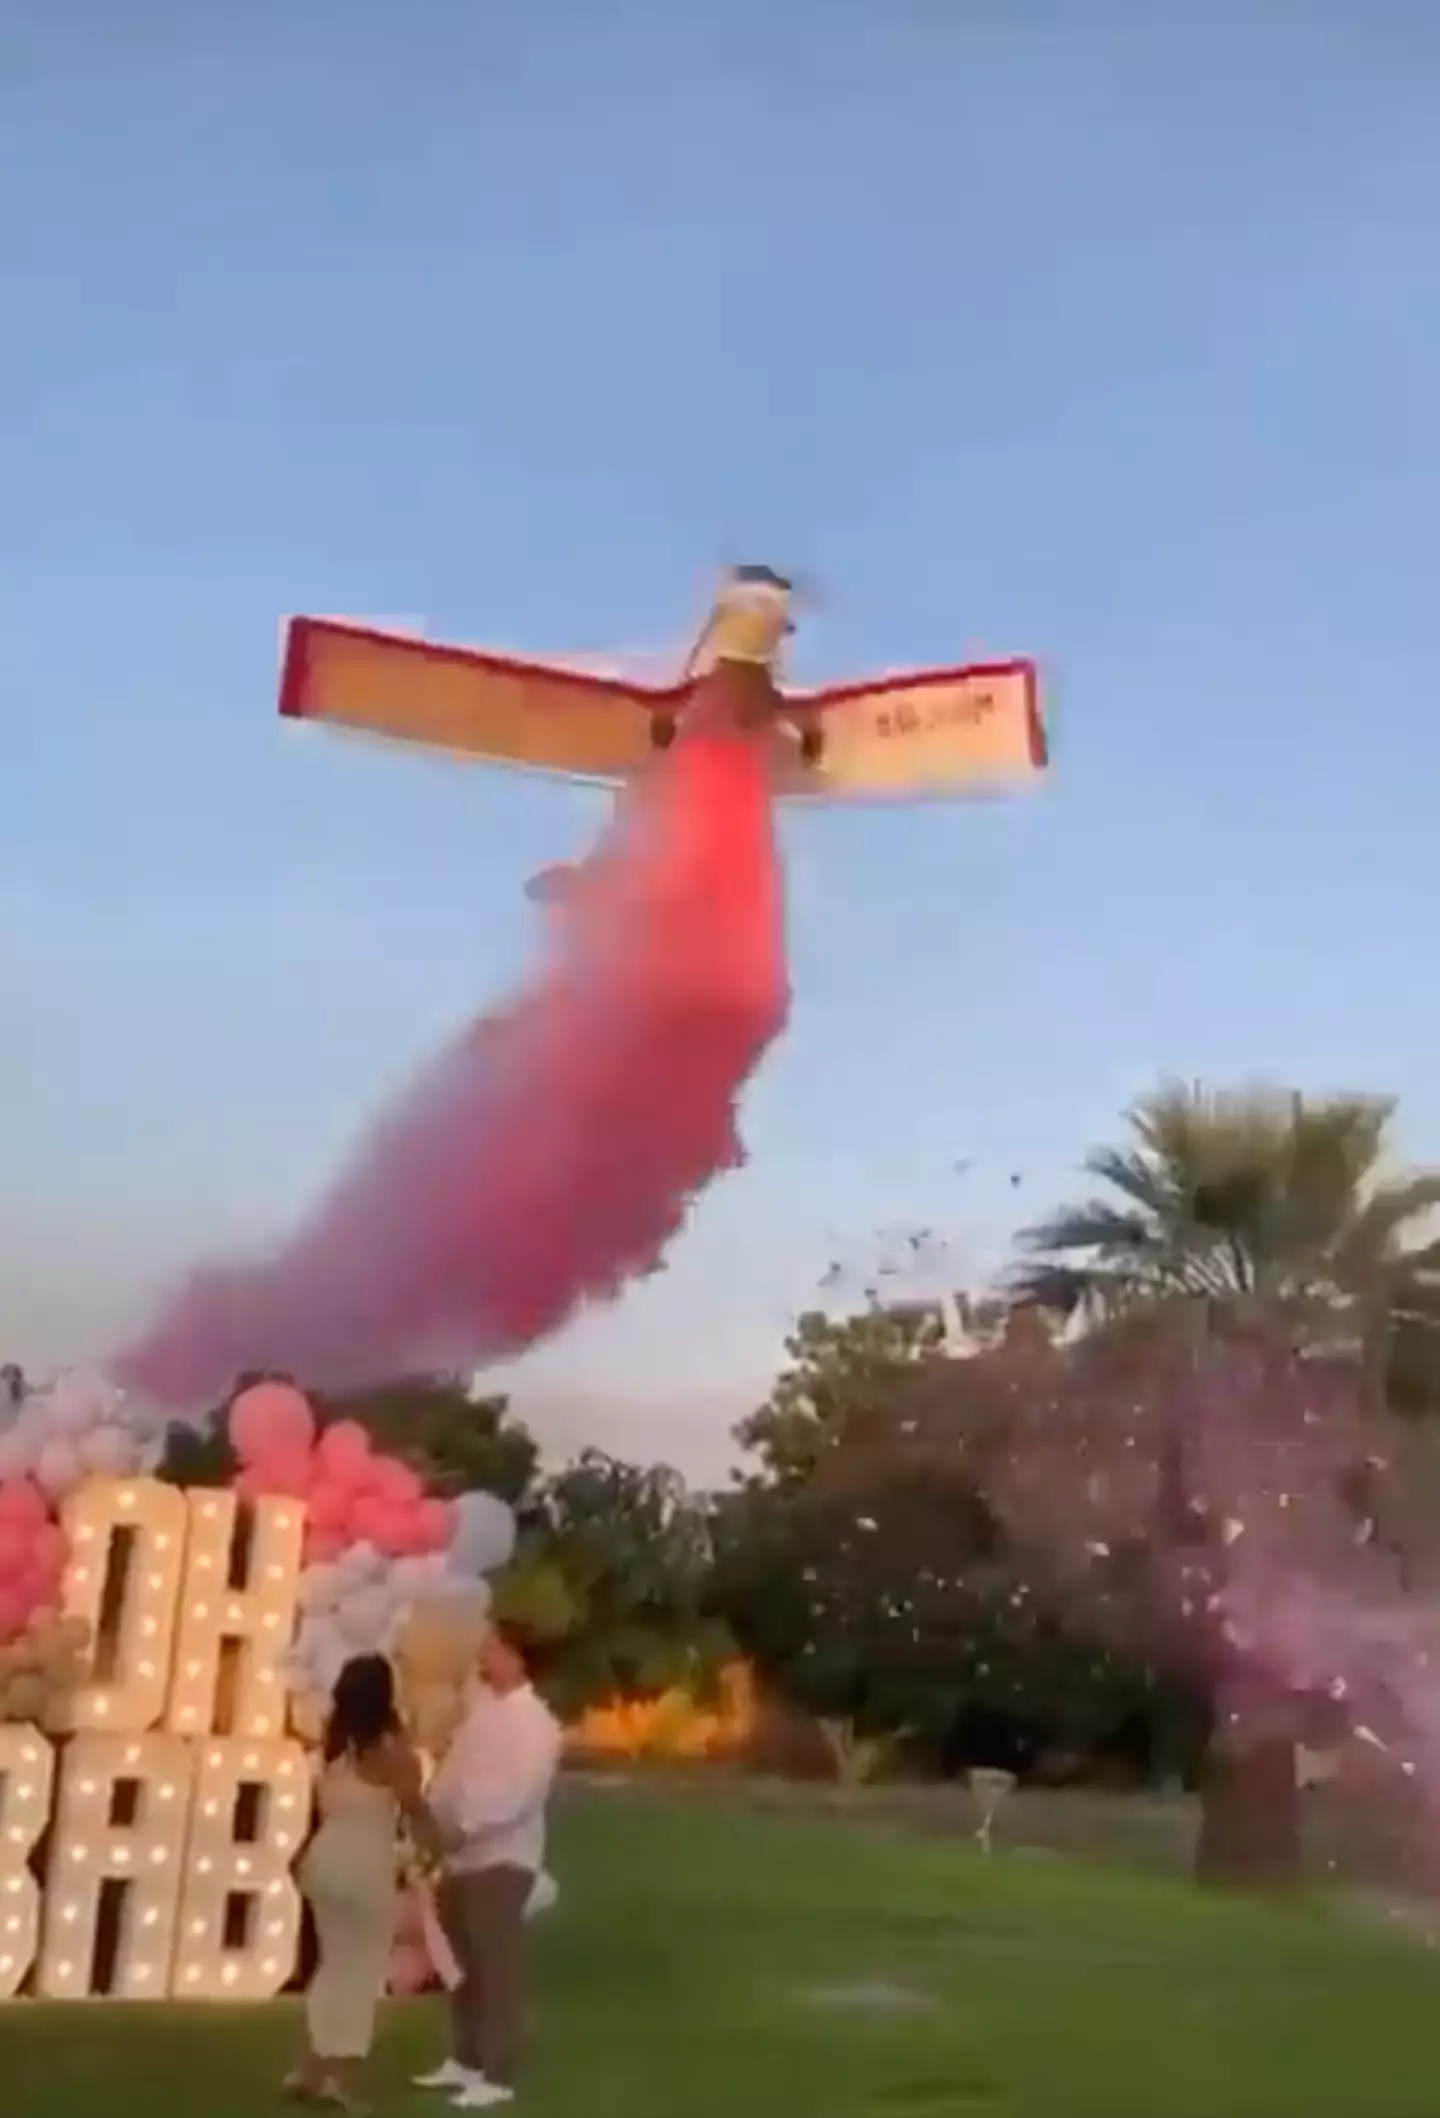 After dumping the pink-dyed water, the aircraft seemingly spun out of control.